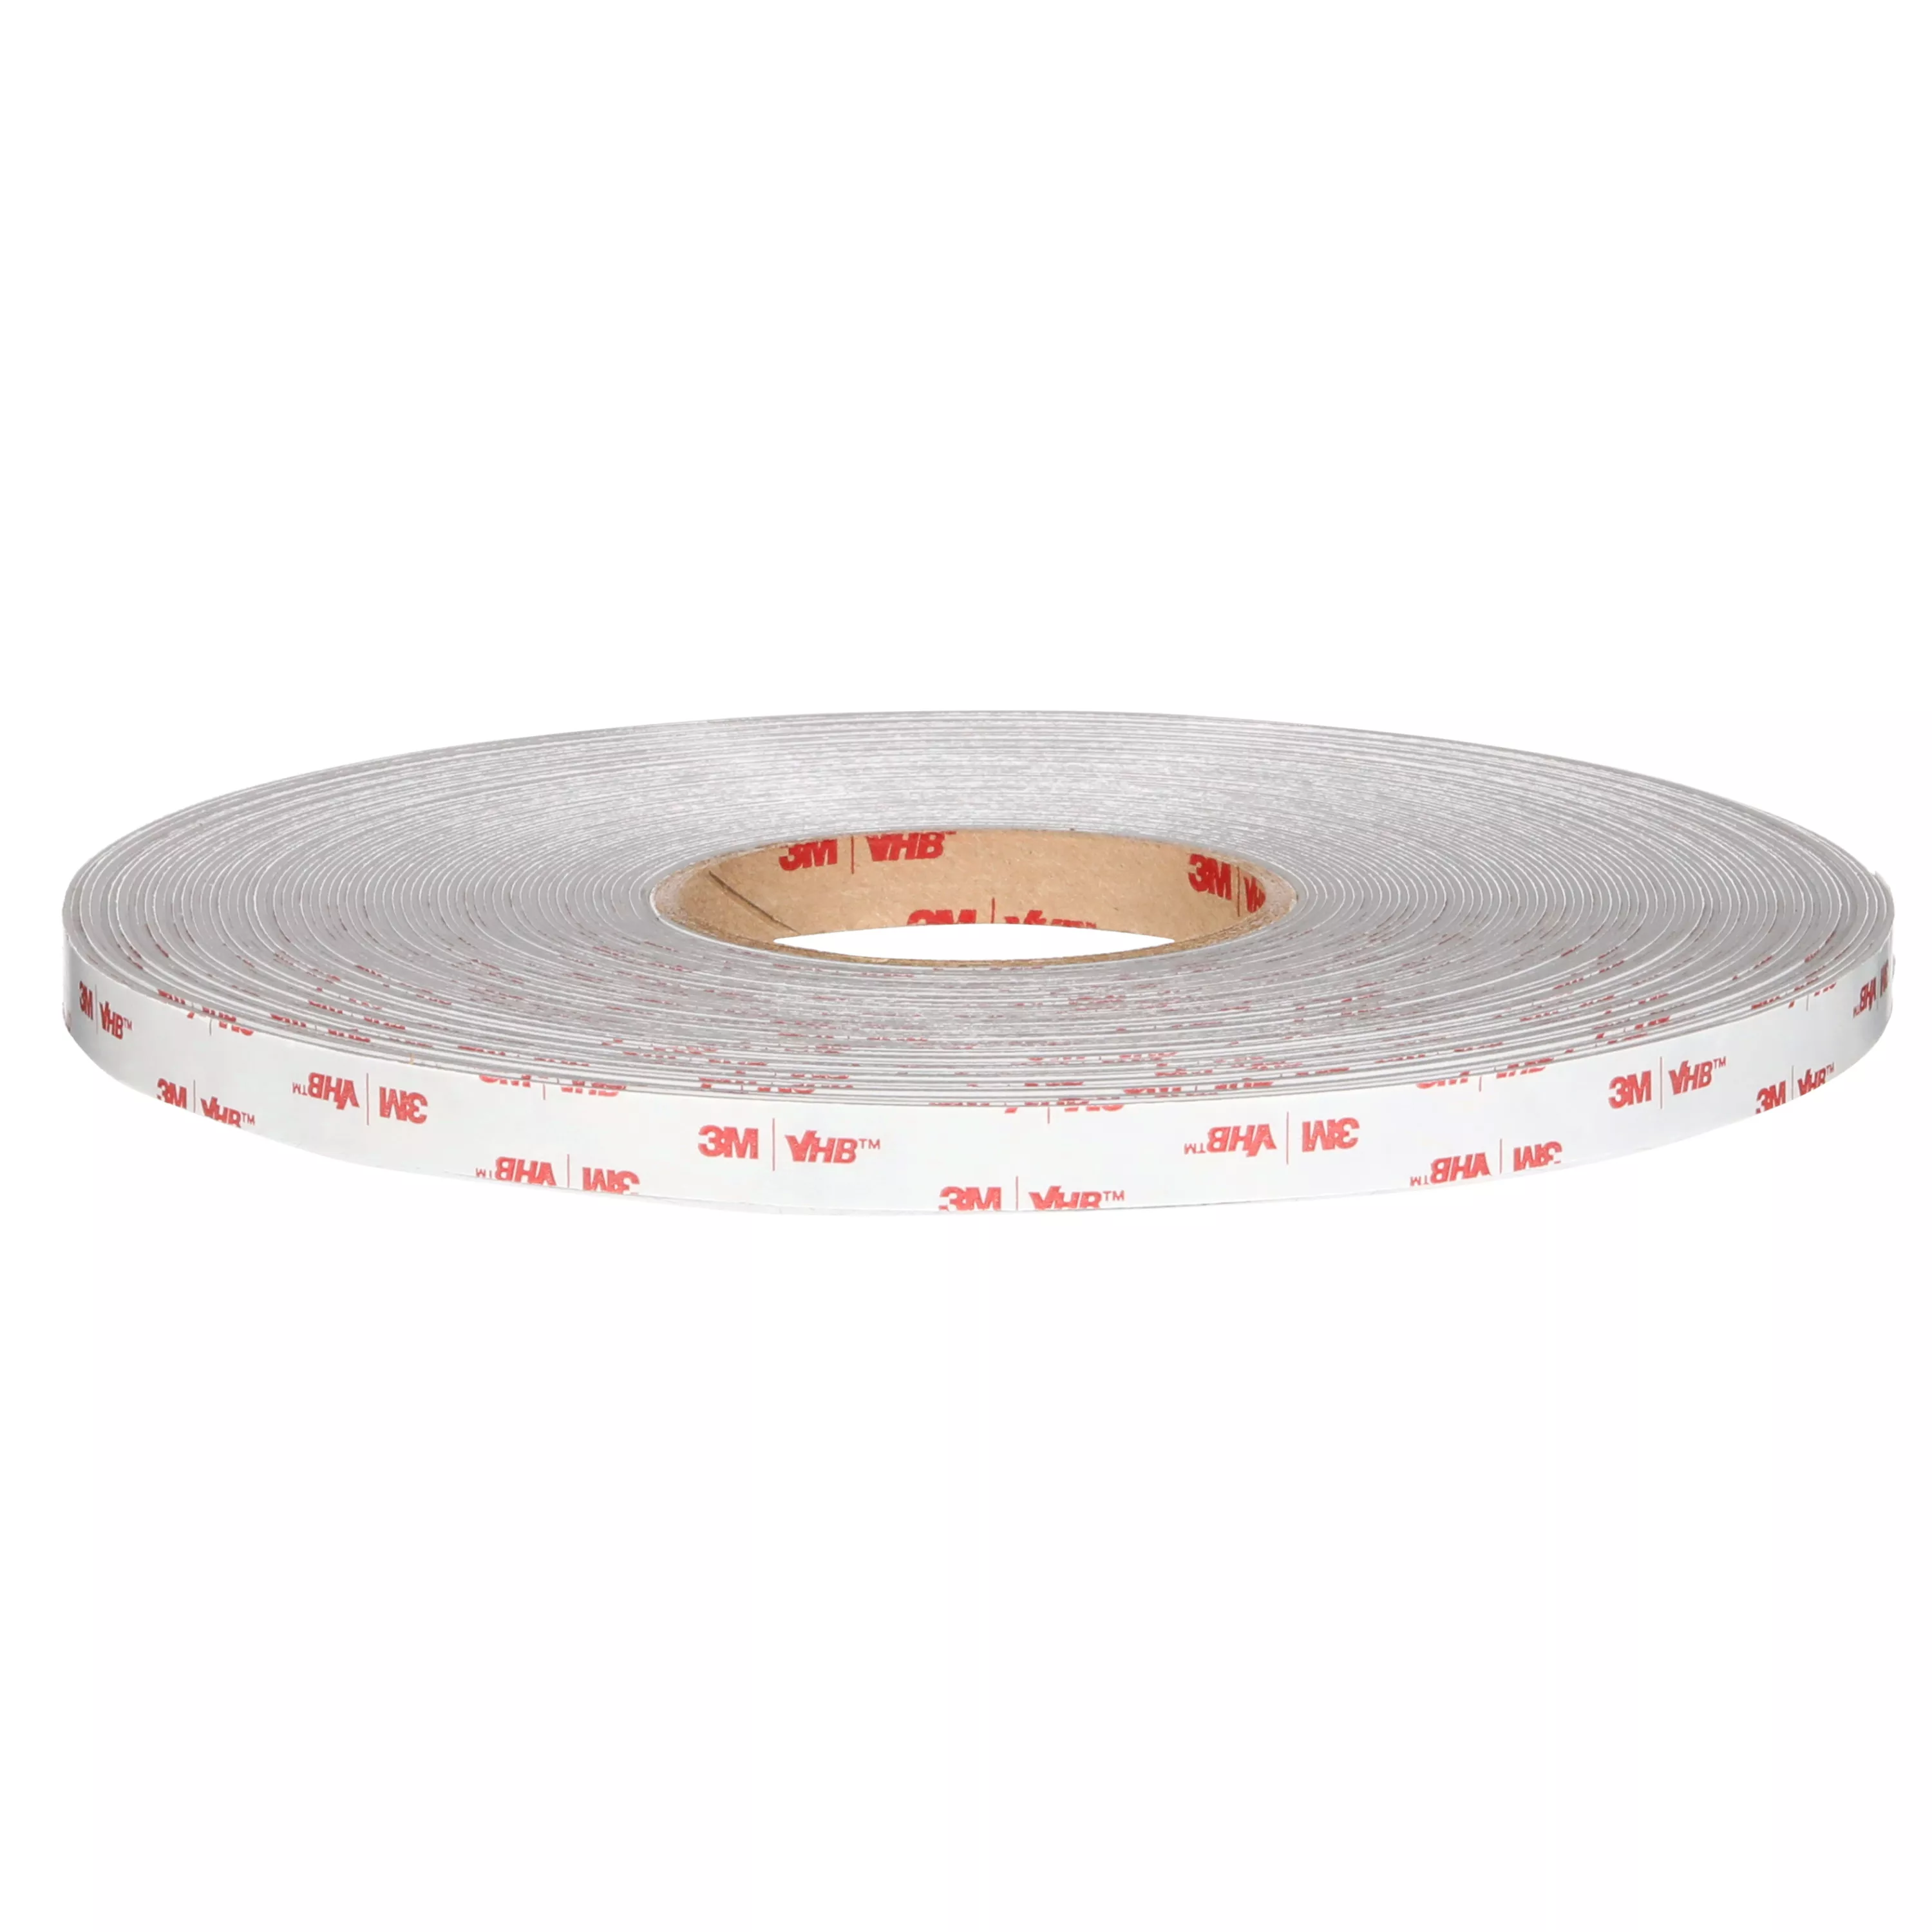 Product Number 4926 | 3M™ VHB™ Tape 4926